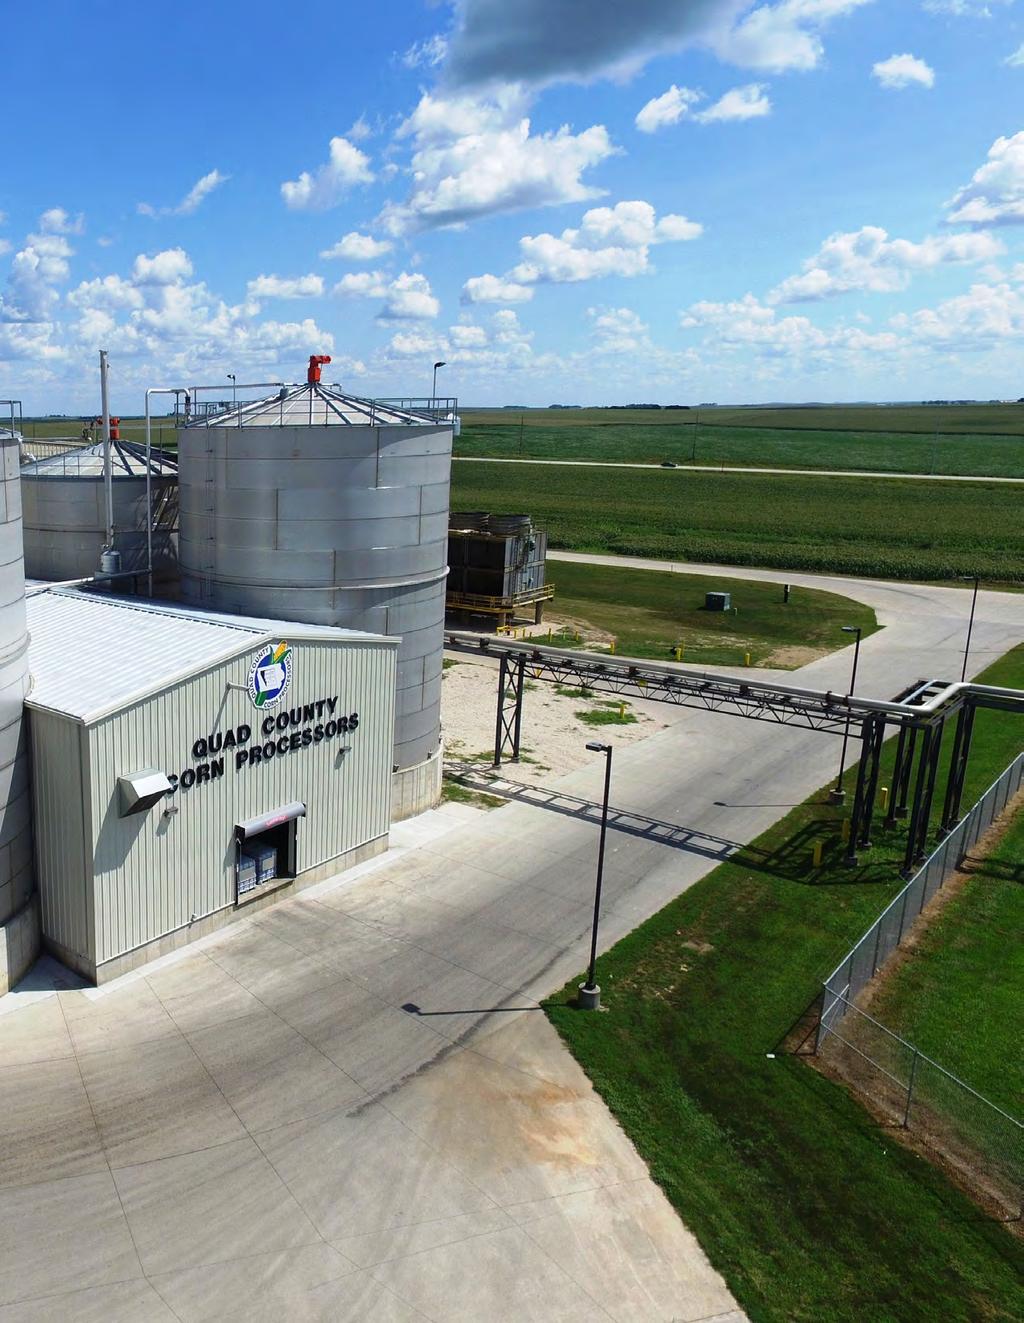 Biomass Innovation - Quad County Corn Processors Quad County Corn Processors (QCCP) is a corn processing facility in Galva, Iowa, that produces protein, distiller s corn oil, ethanol and cellulosic